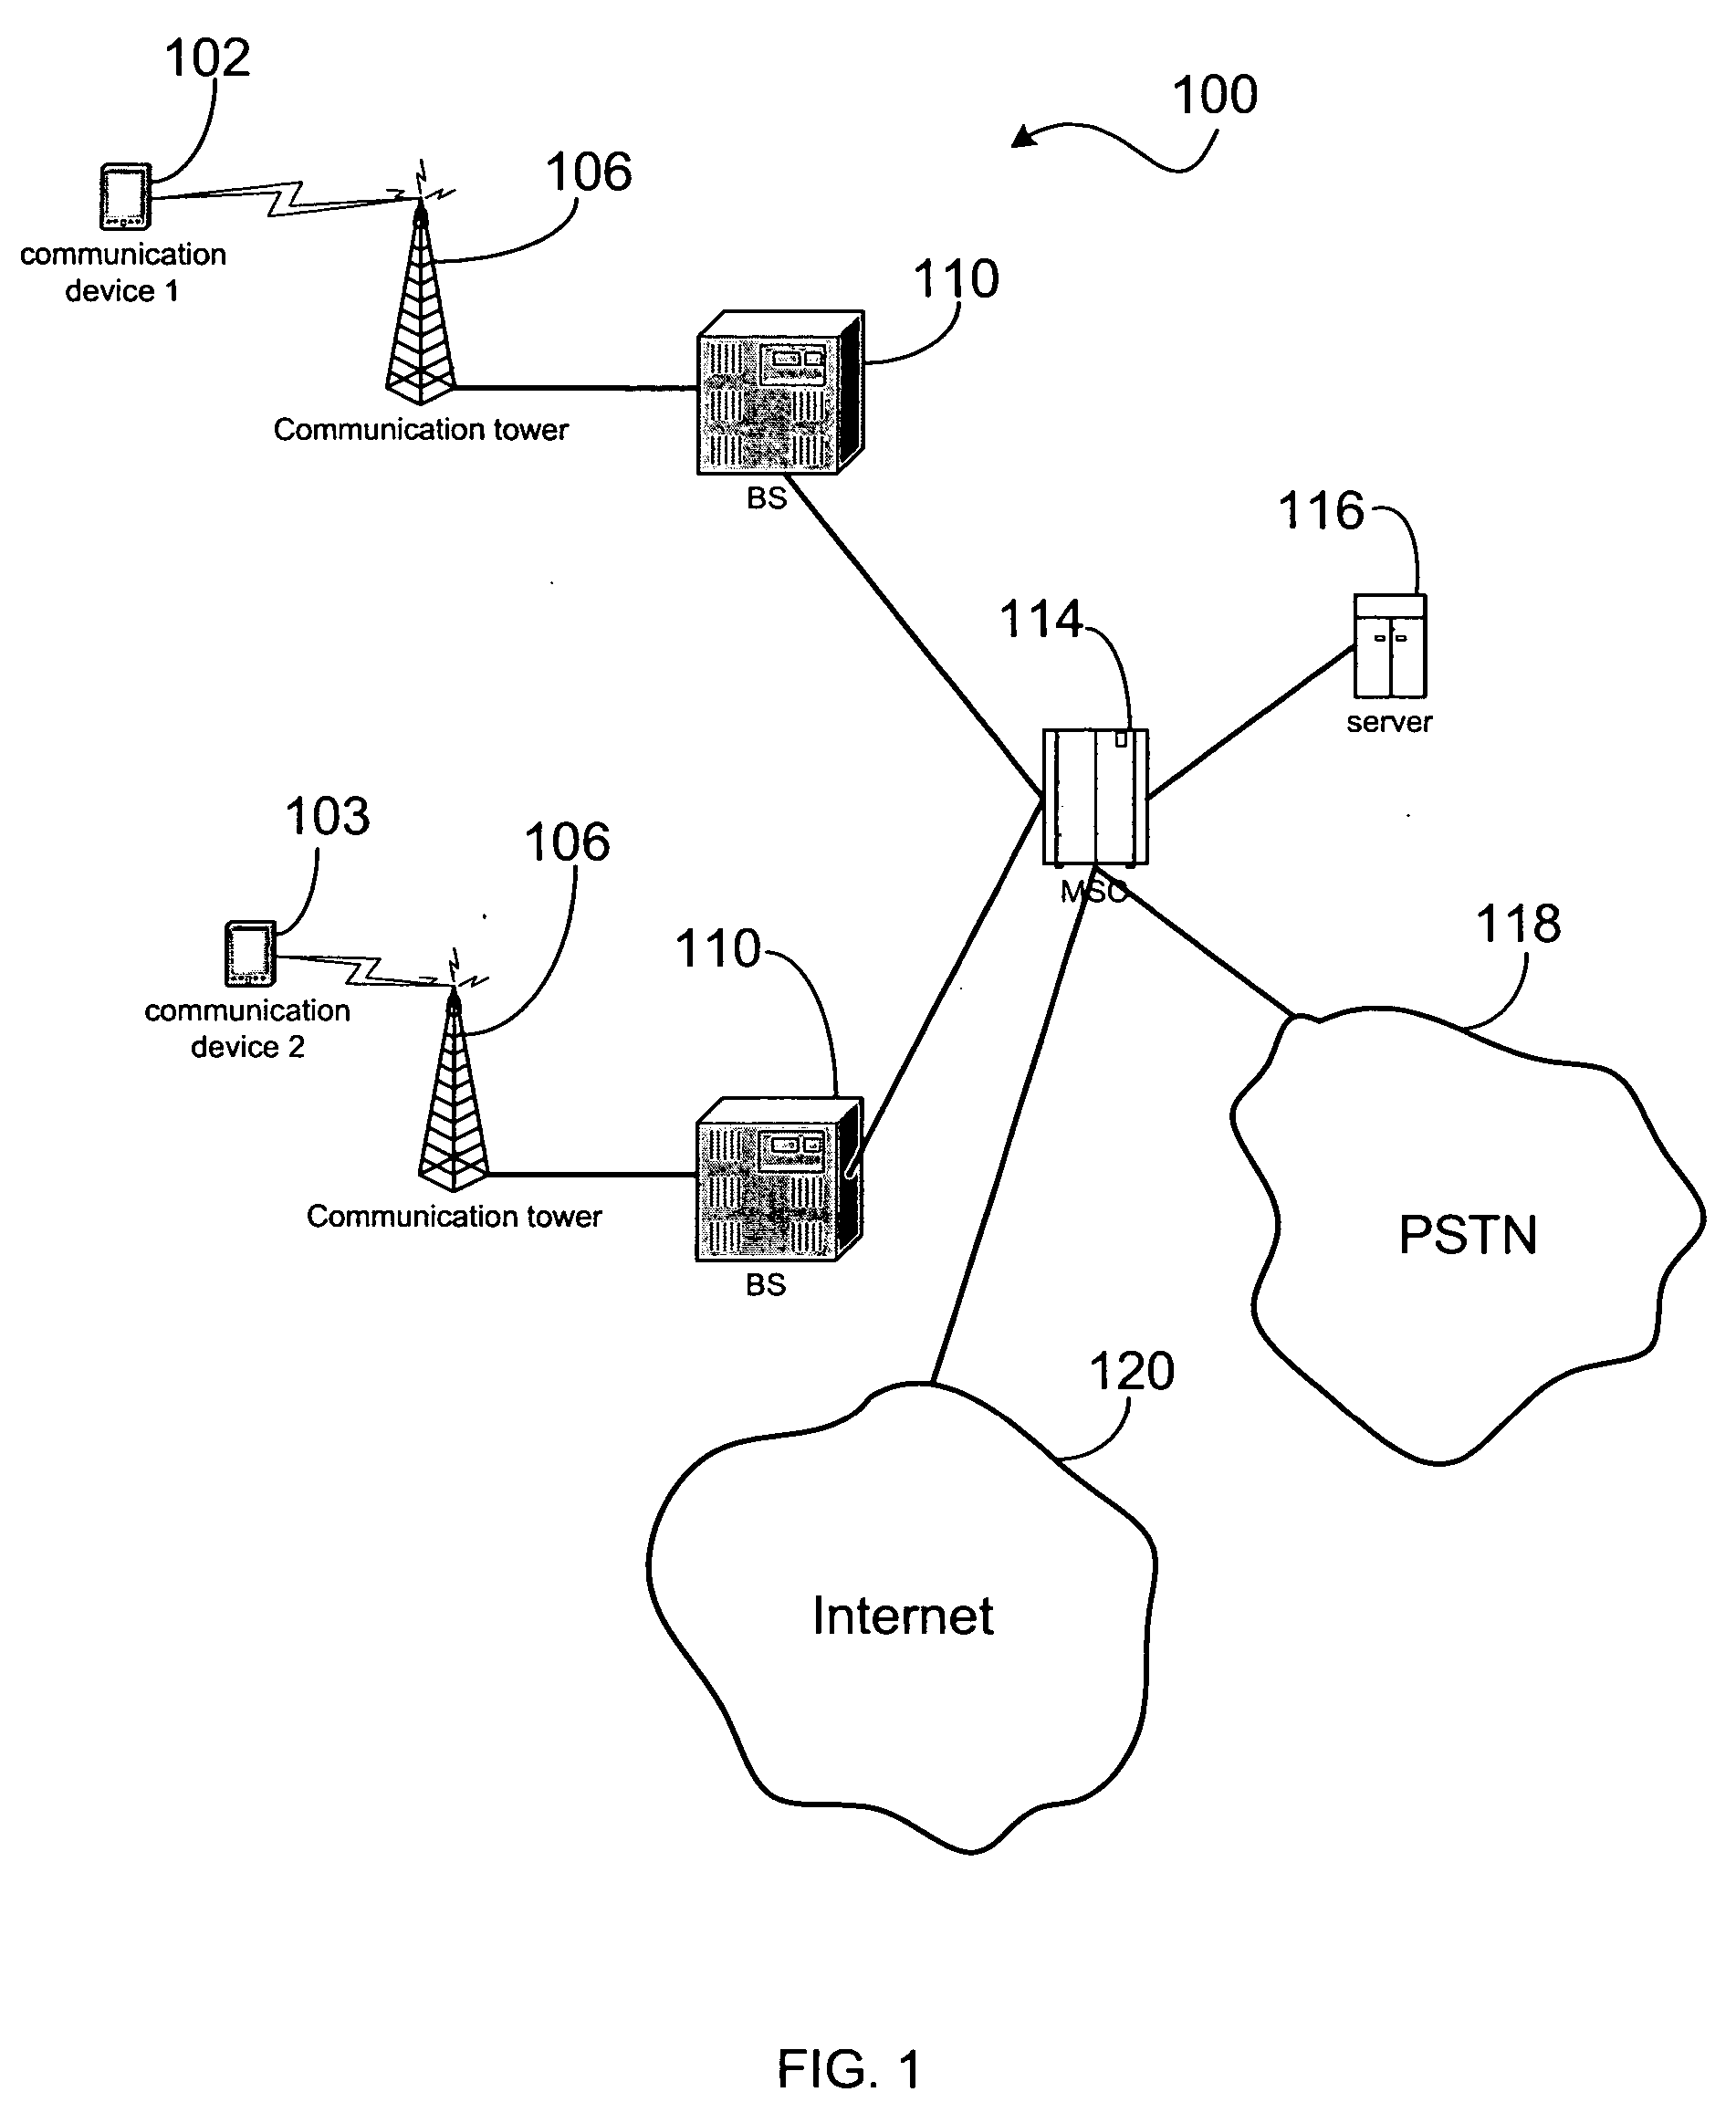 Method and apparatus to adaptively manage end-to-end voice over Internet protocol (VoIP) media latency